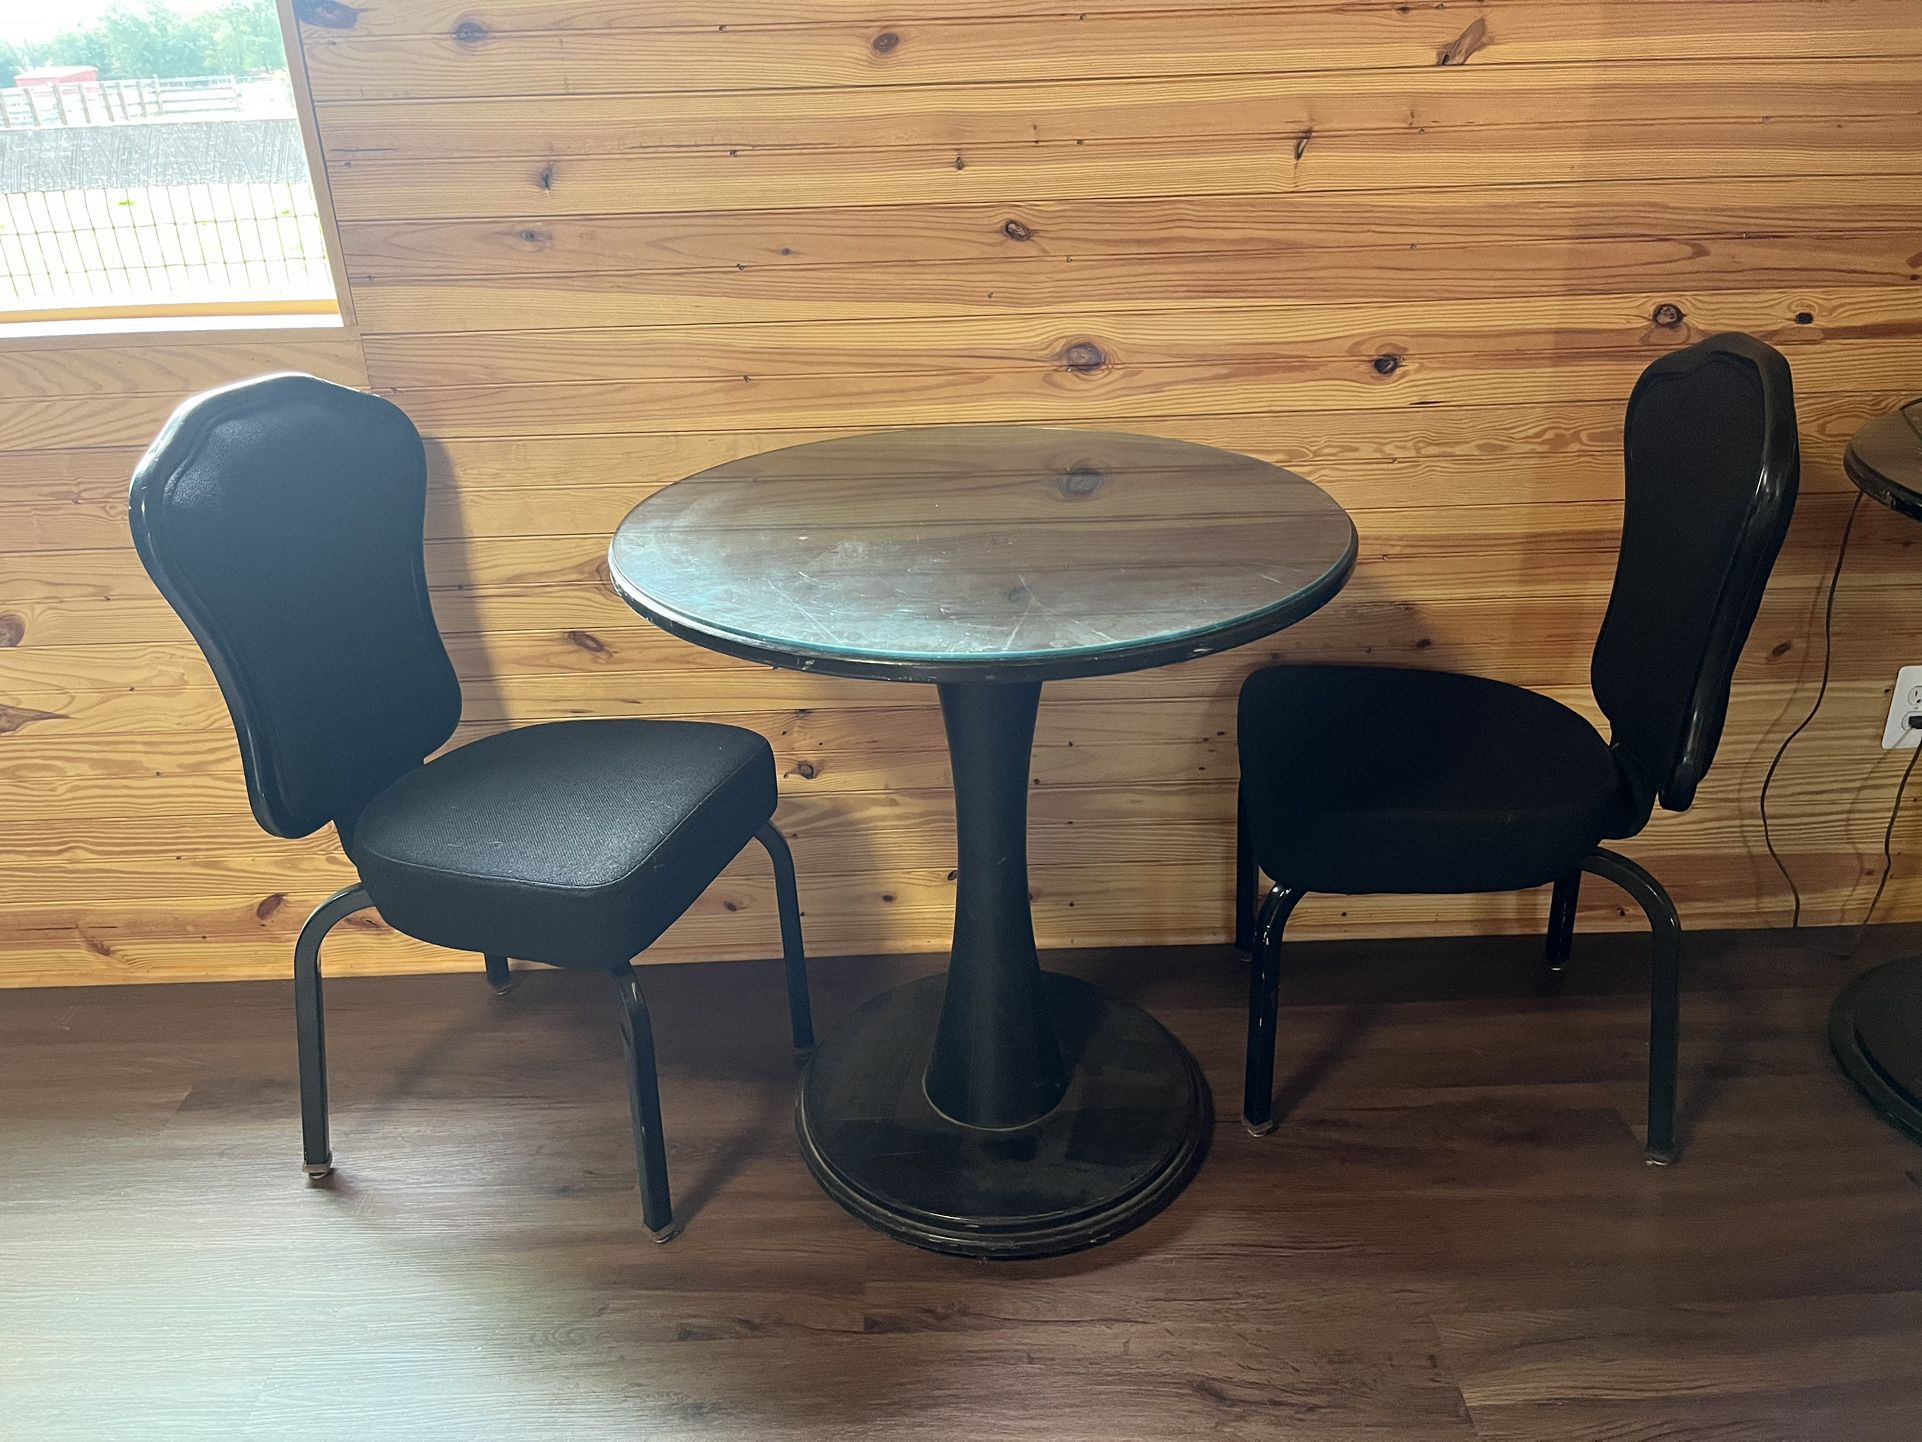 Bistro Table With Glass Top  & 2 Chairs